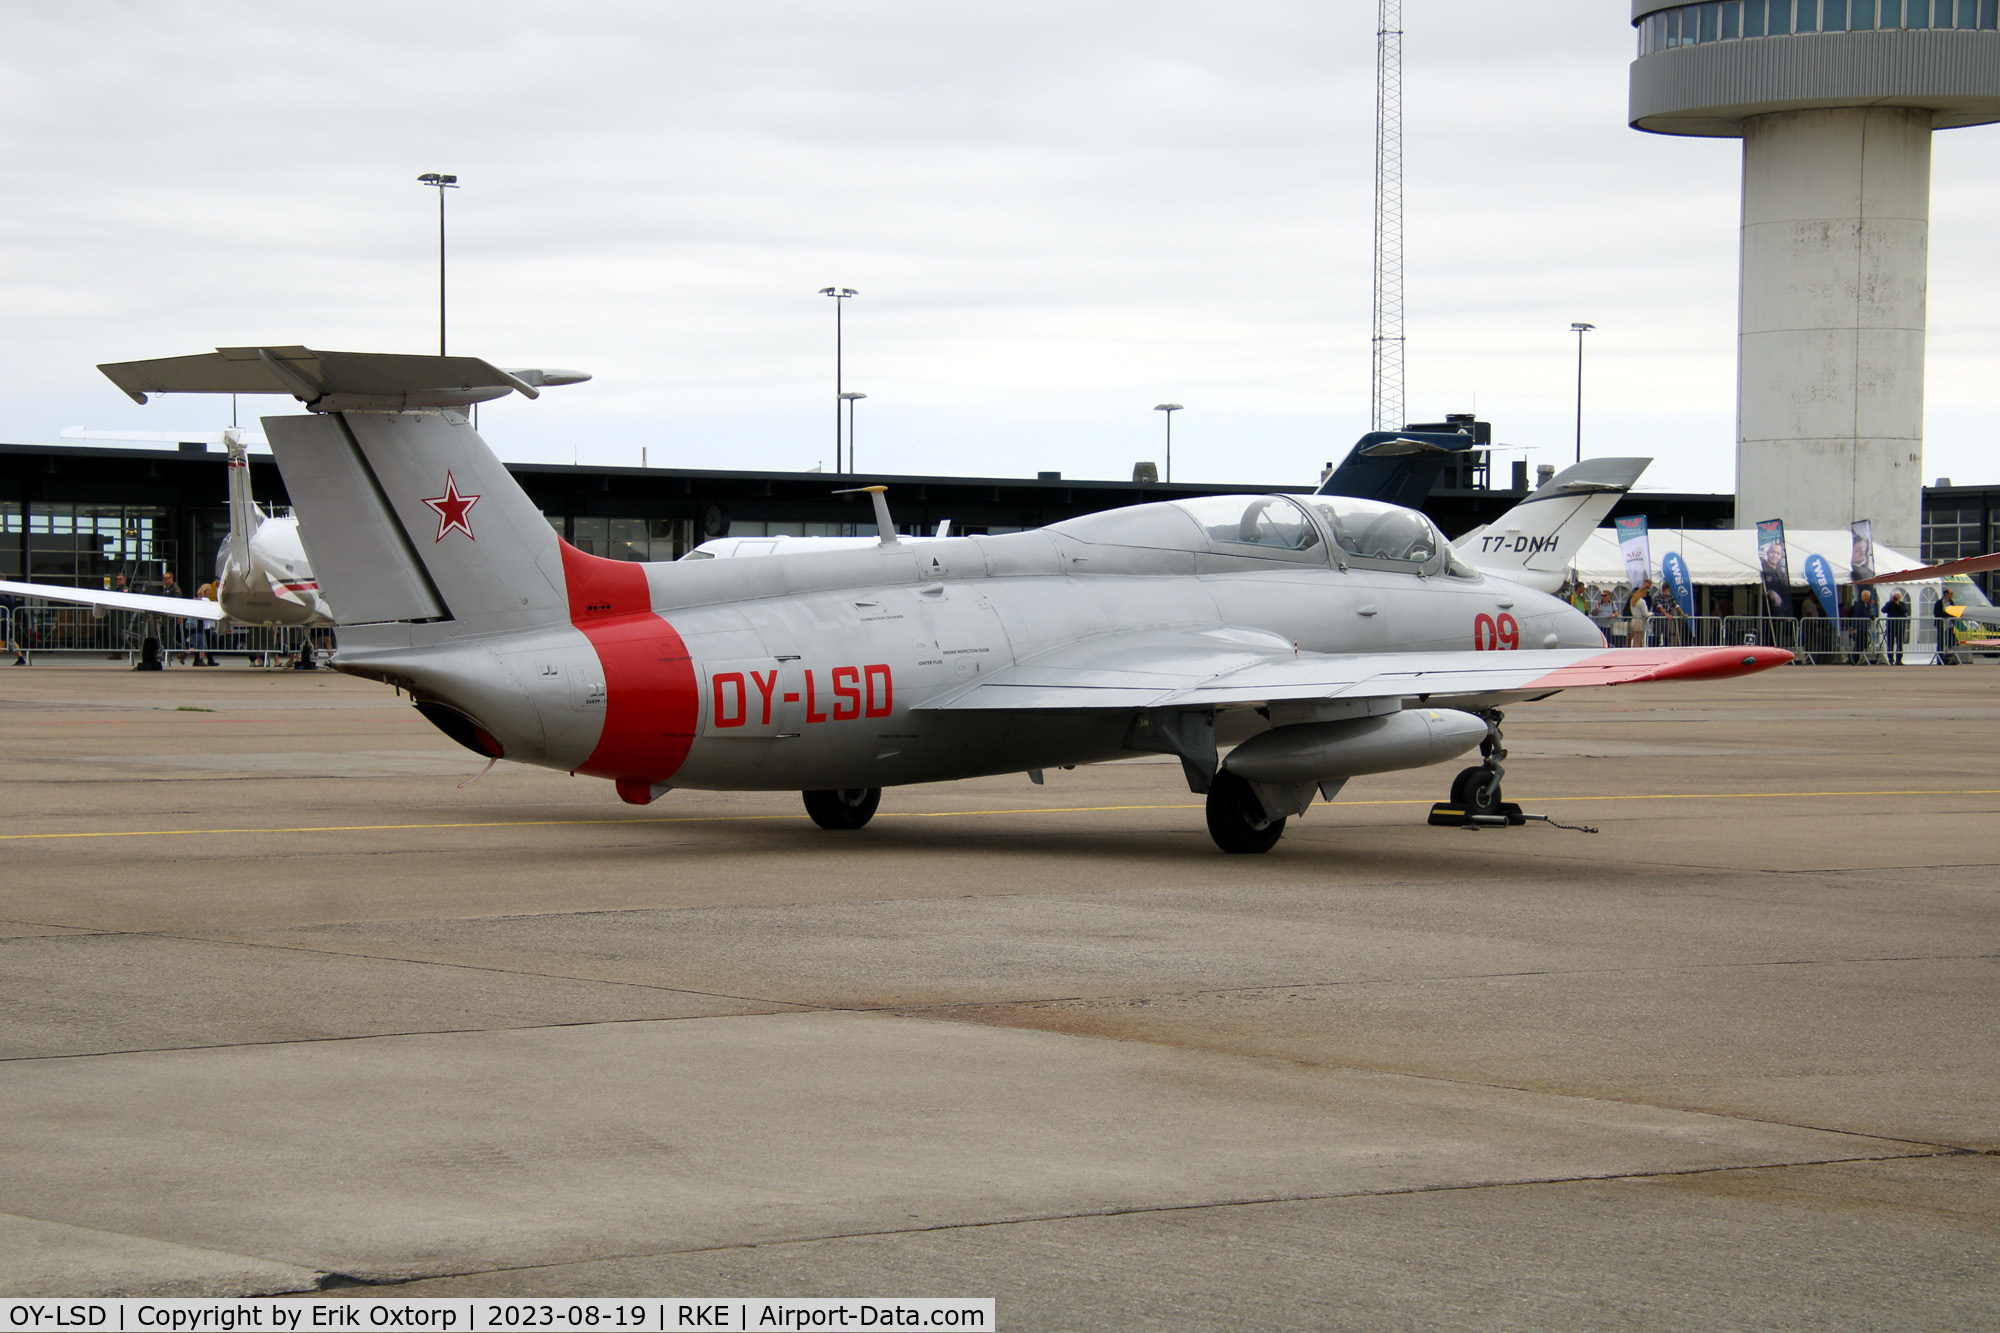 OY-LSD, 1973 Aero L-29 C/N 394952, OY-LSD at the Roskilde Airshow